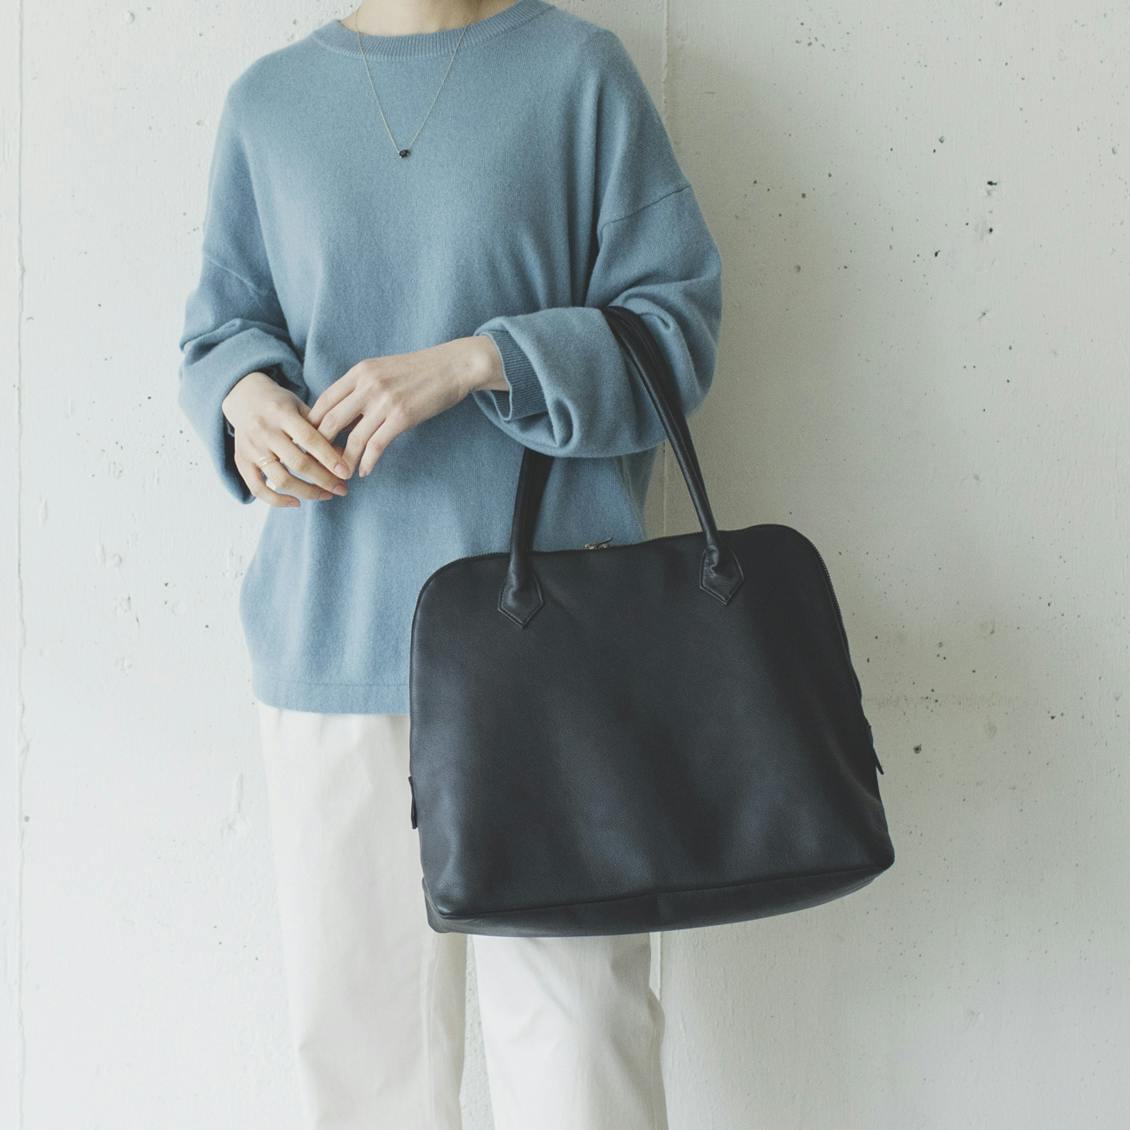 CLASKA & THE FACTORY / レザートートバッグ / Silva Tote Bag Leather